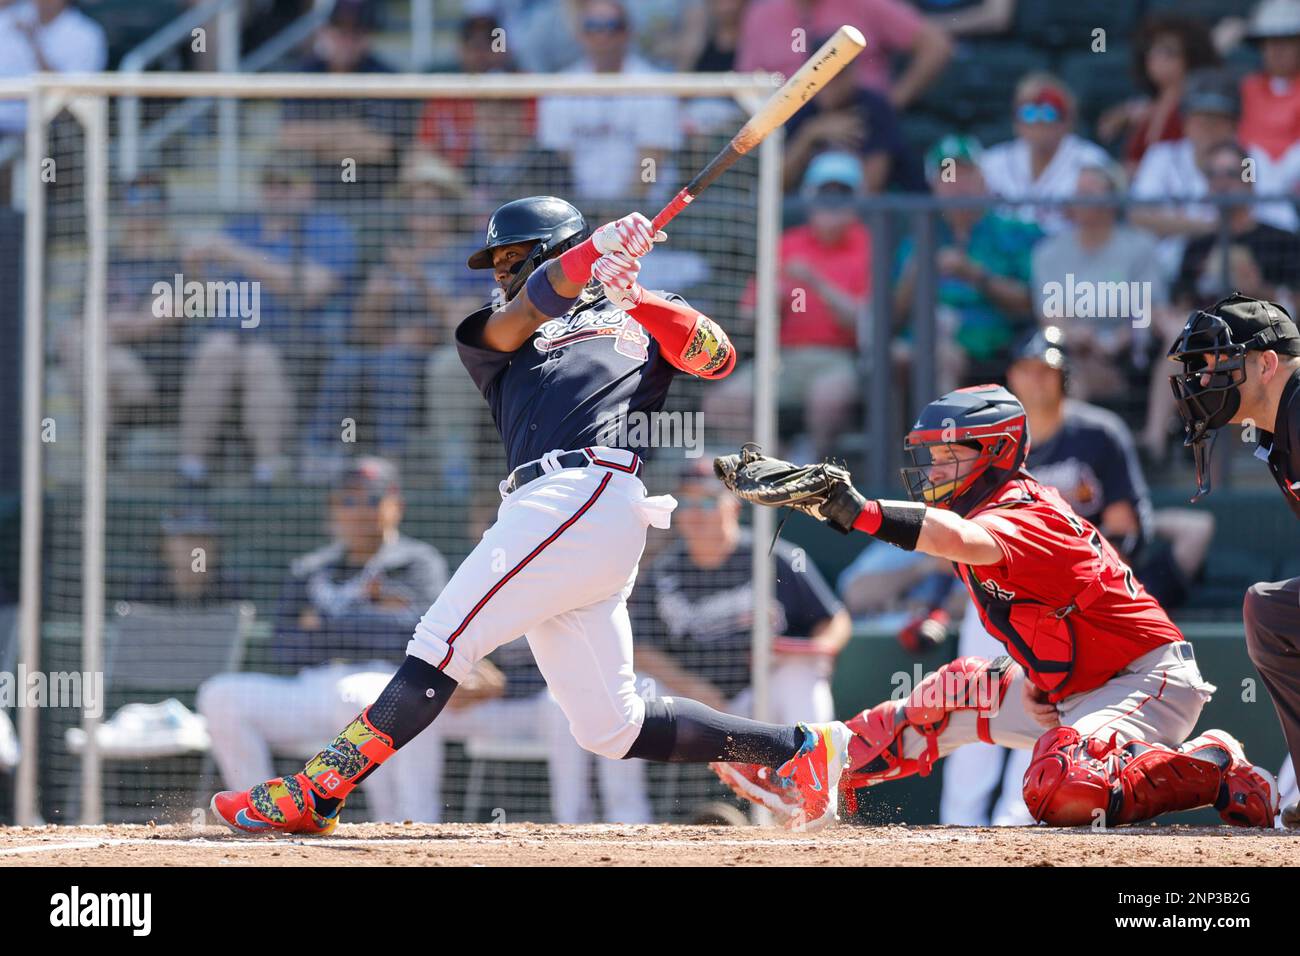 North Port FL USA: Atlanta Braves right fielder Ronald Acuna Jr. (13) hits a single to left field during an MLB spring training game against the Bosto Stock Photo